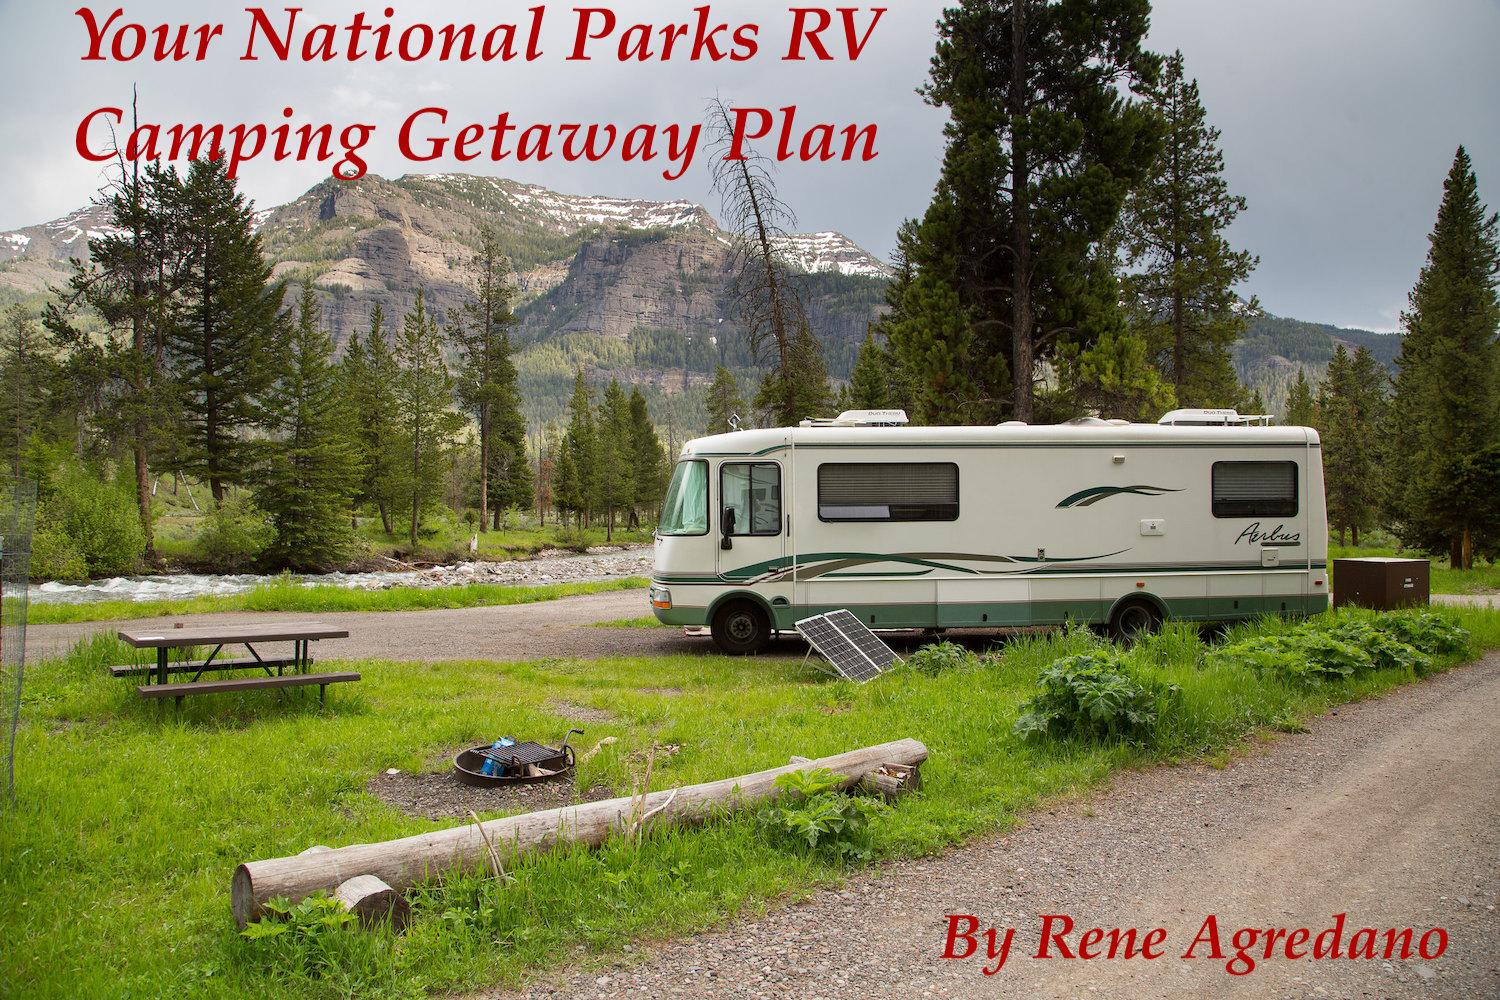 Finding an RV campsite in the National Park System